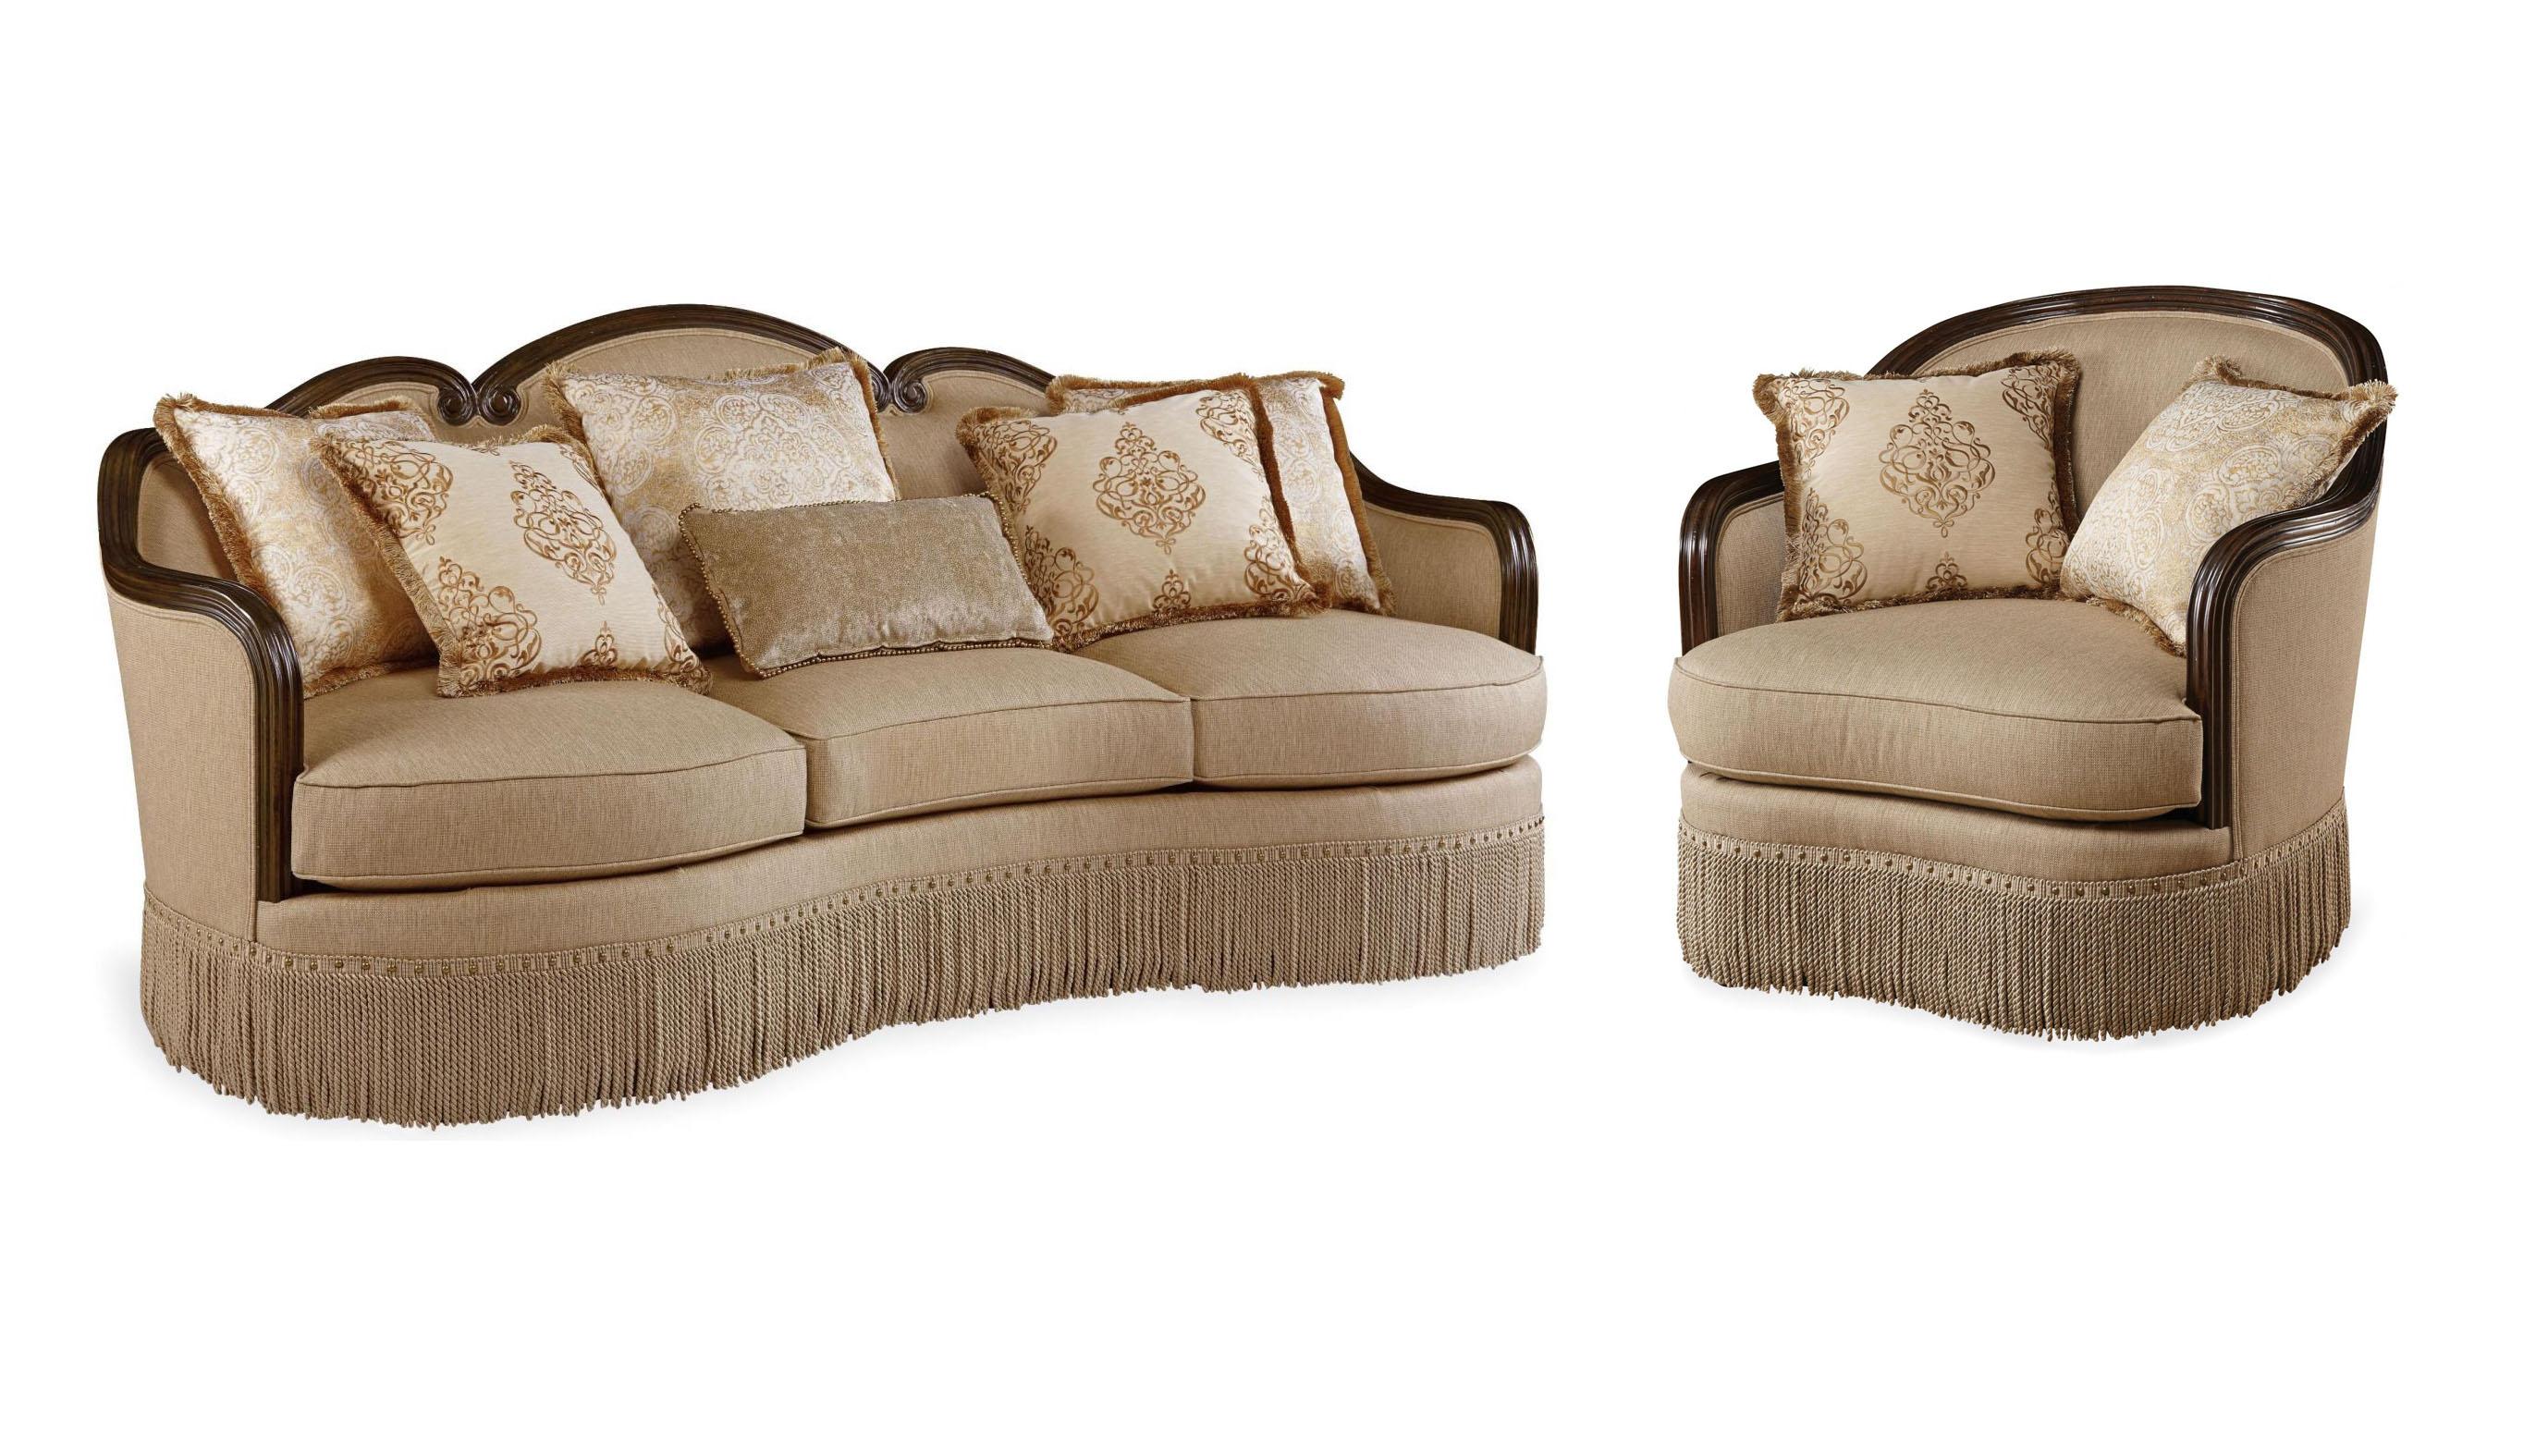 Contemporary Sofa and Chair Giovanna 509501-5327AB-2pcs in Beige Fabric